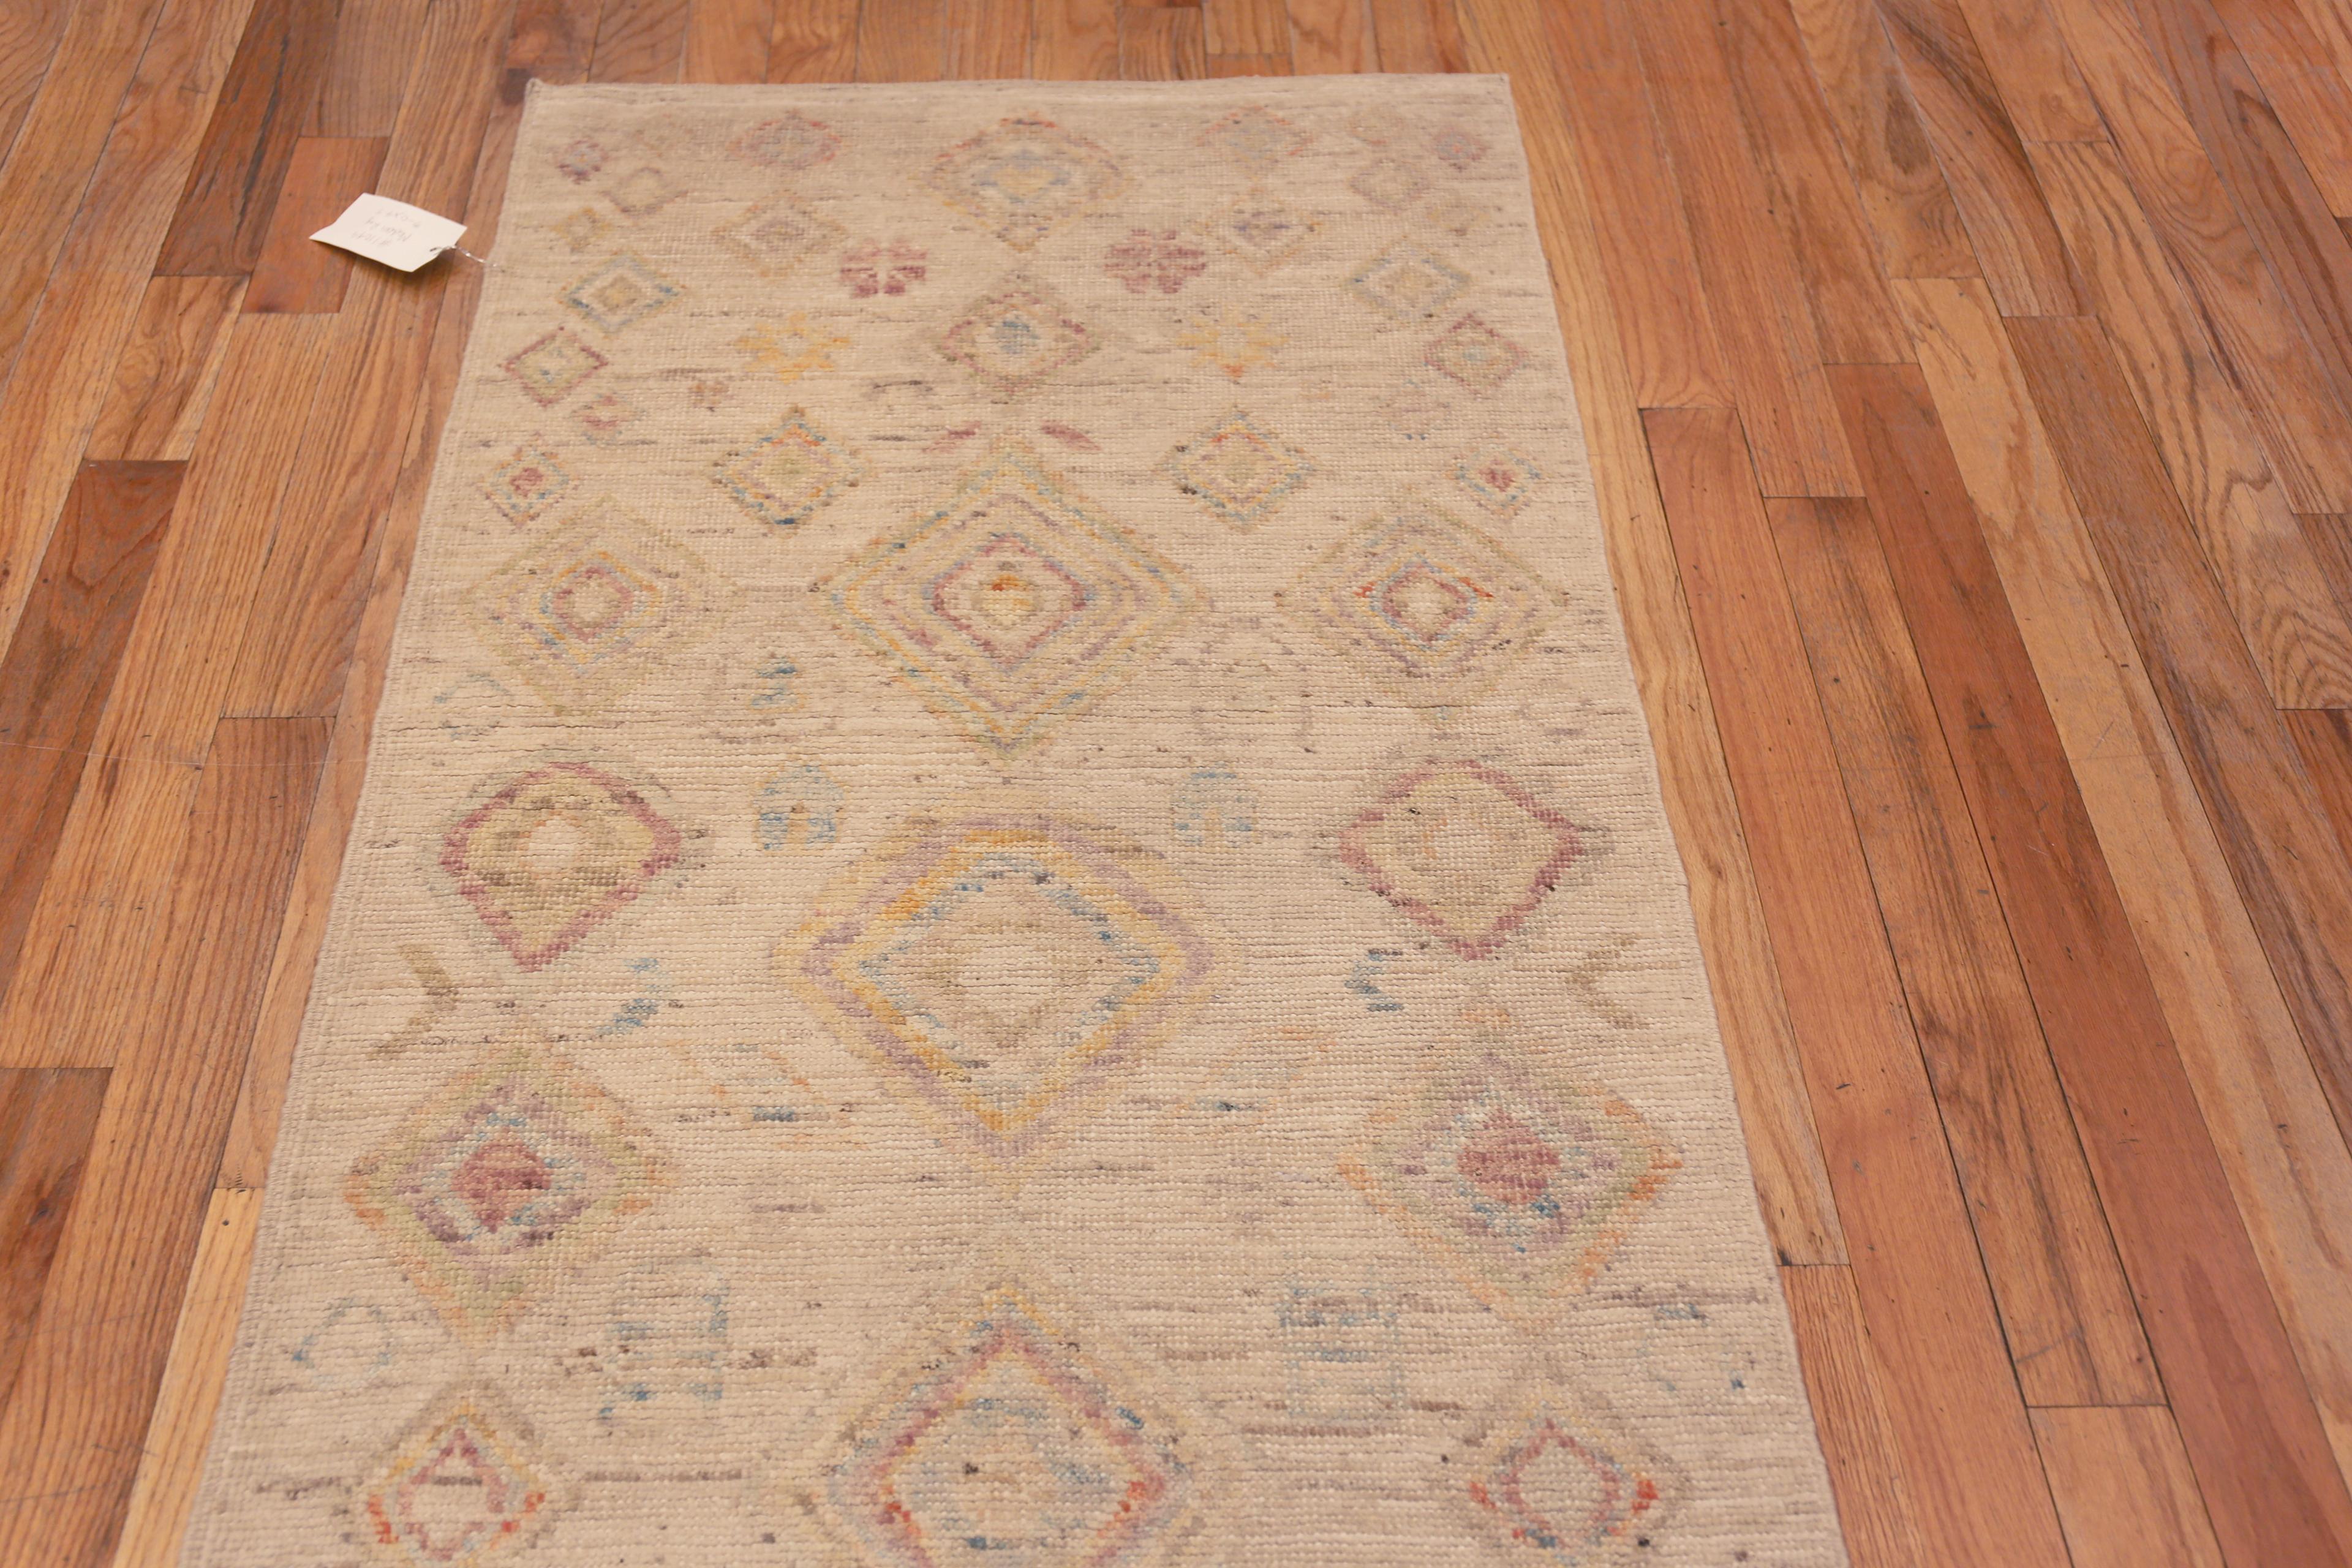 Central Asian Nazmiyal Collection Ivory and Rustic Tribal Pattern Modern Runner Rug 3' x 9'9